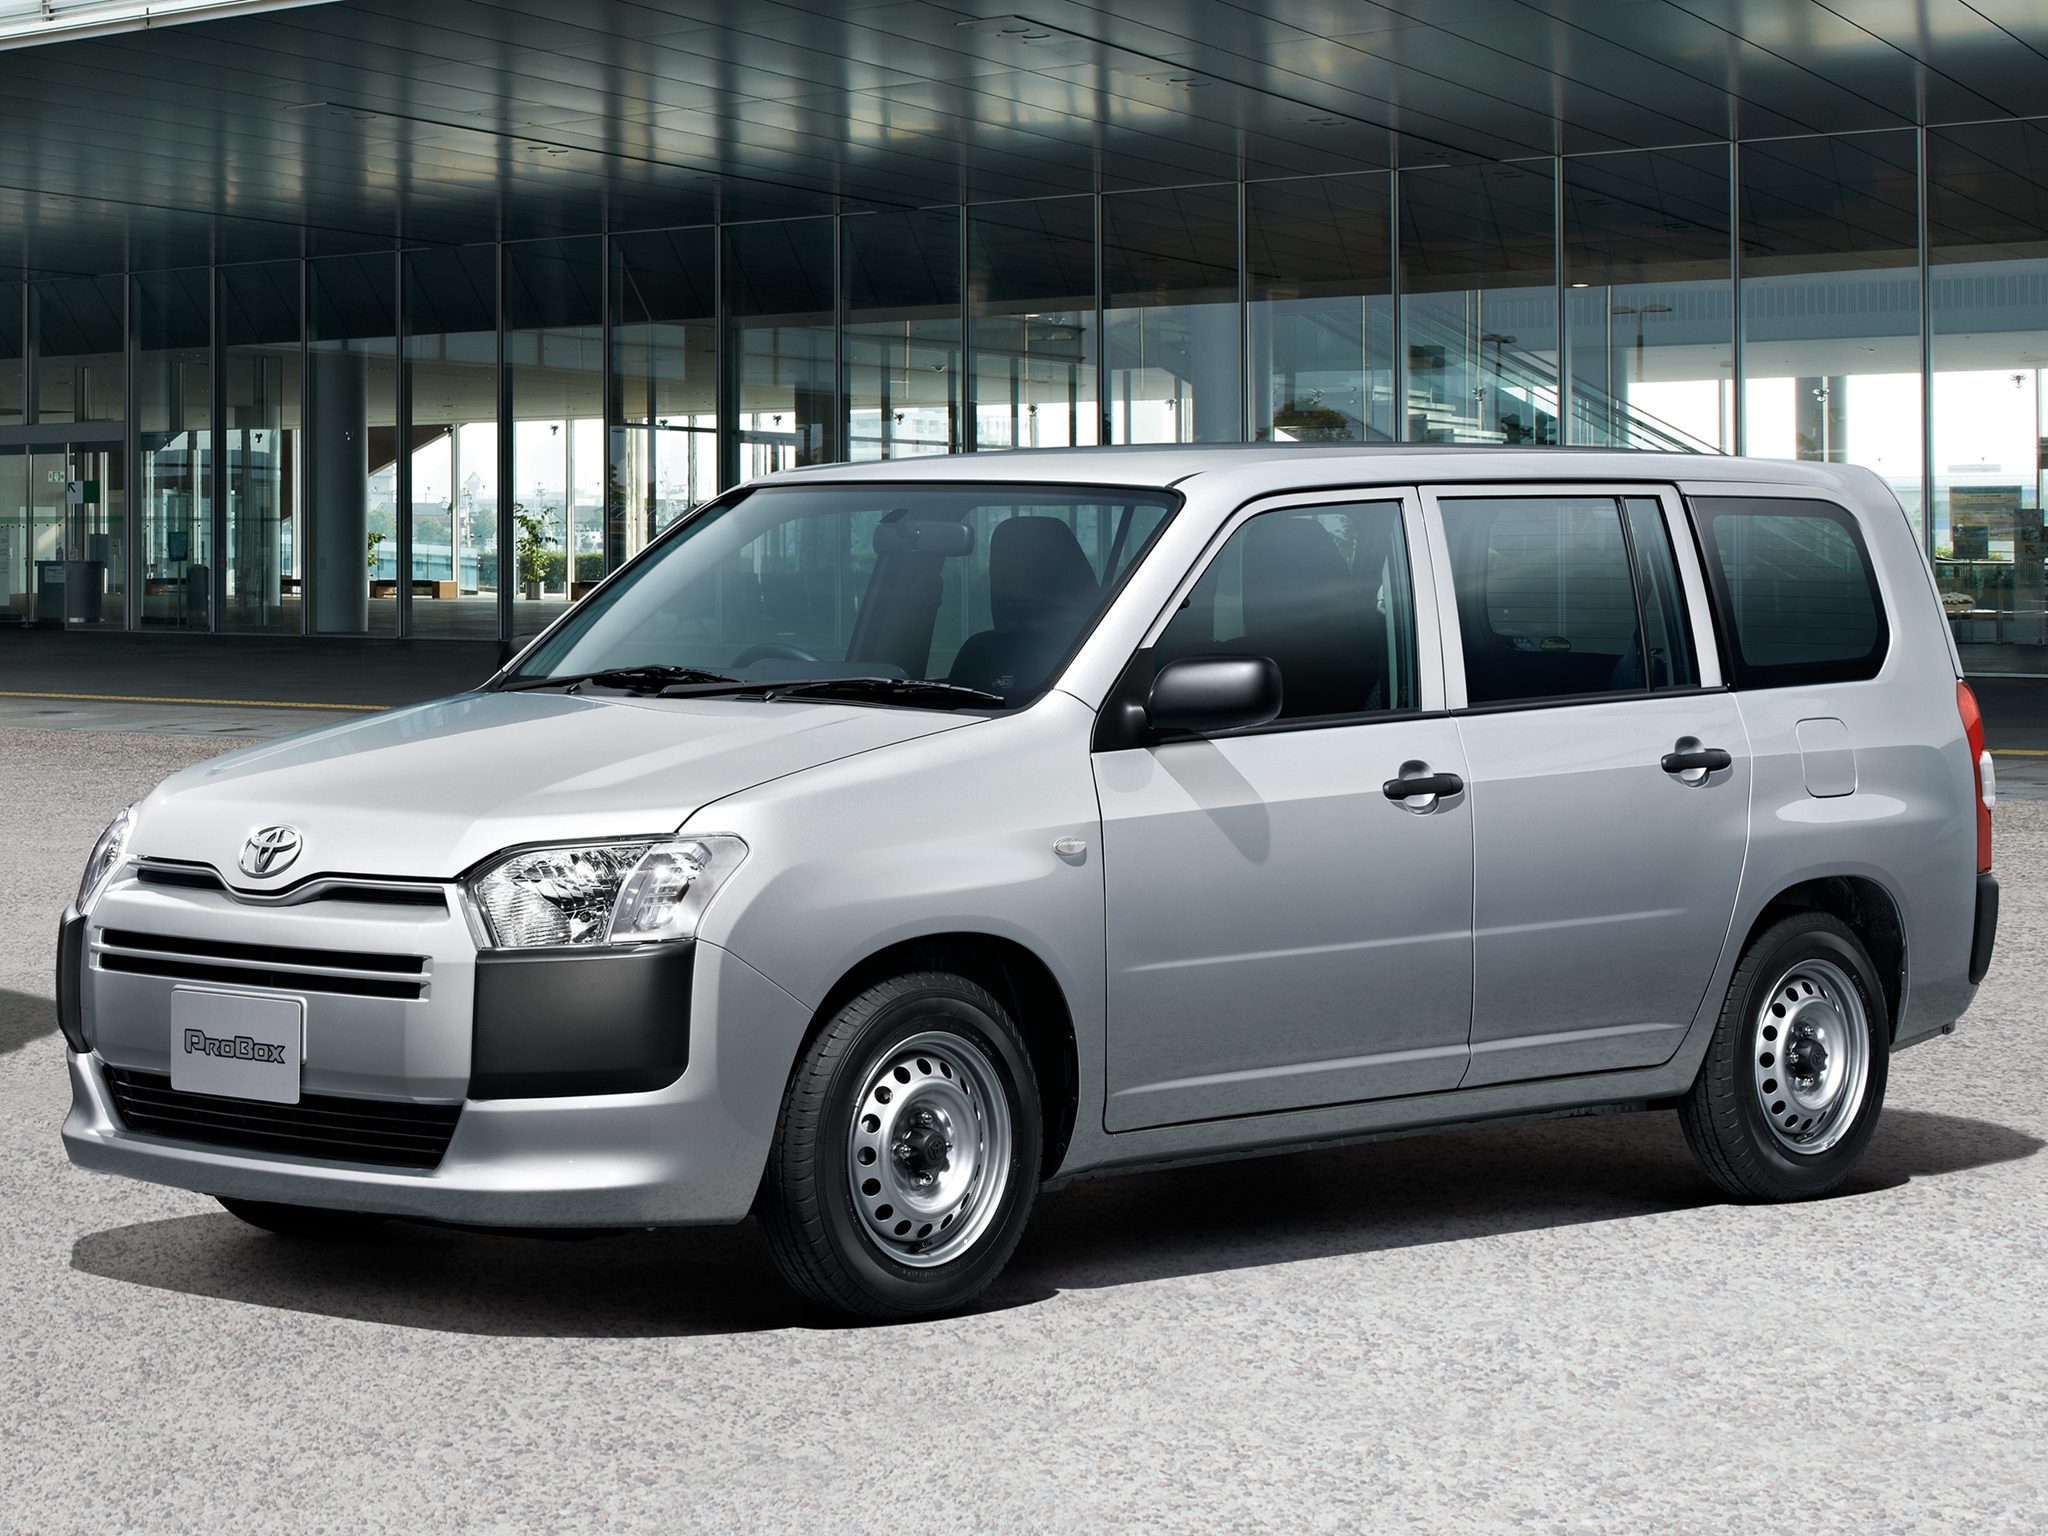 toyota-launches-new-2014-probox-and-succeed-in-japan-photo-gallery_20.jpg